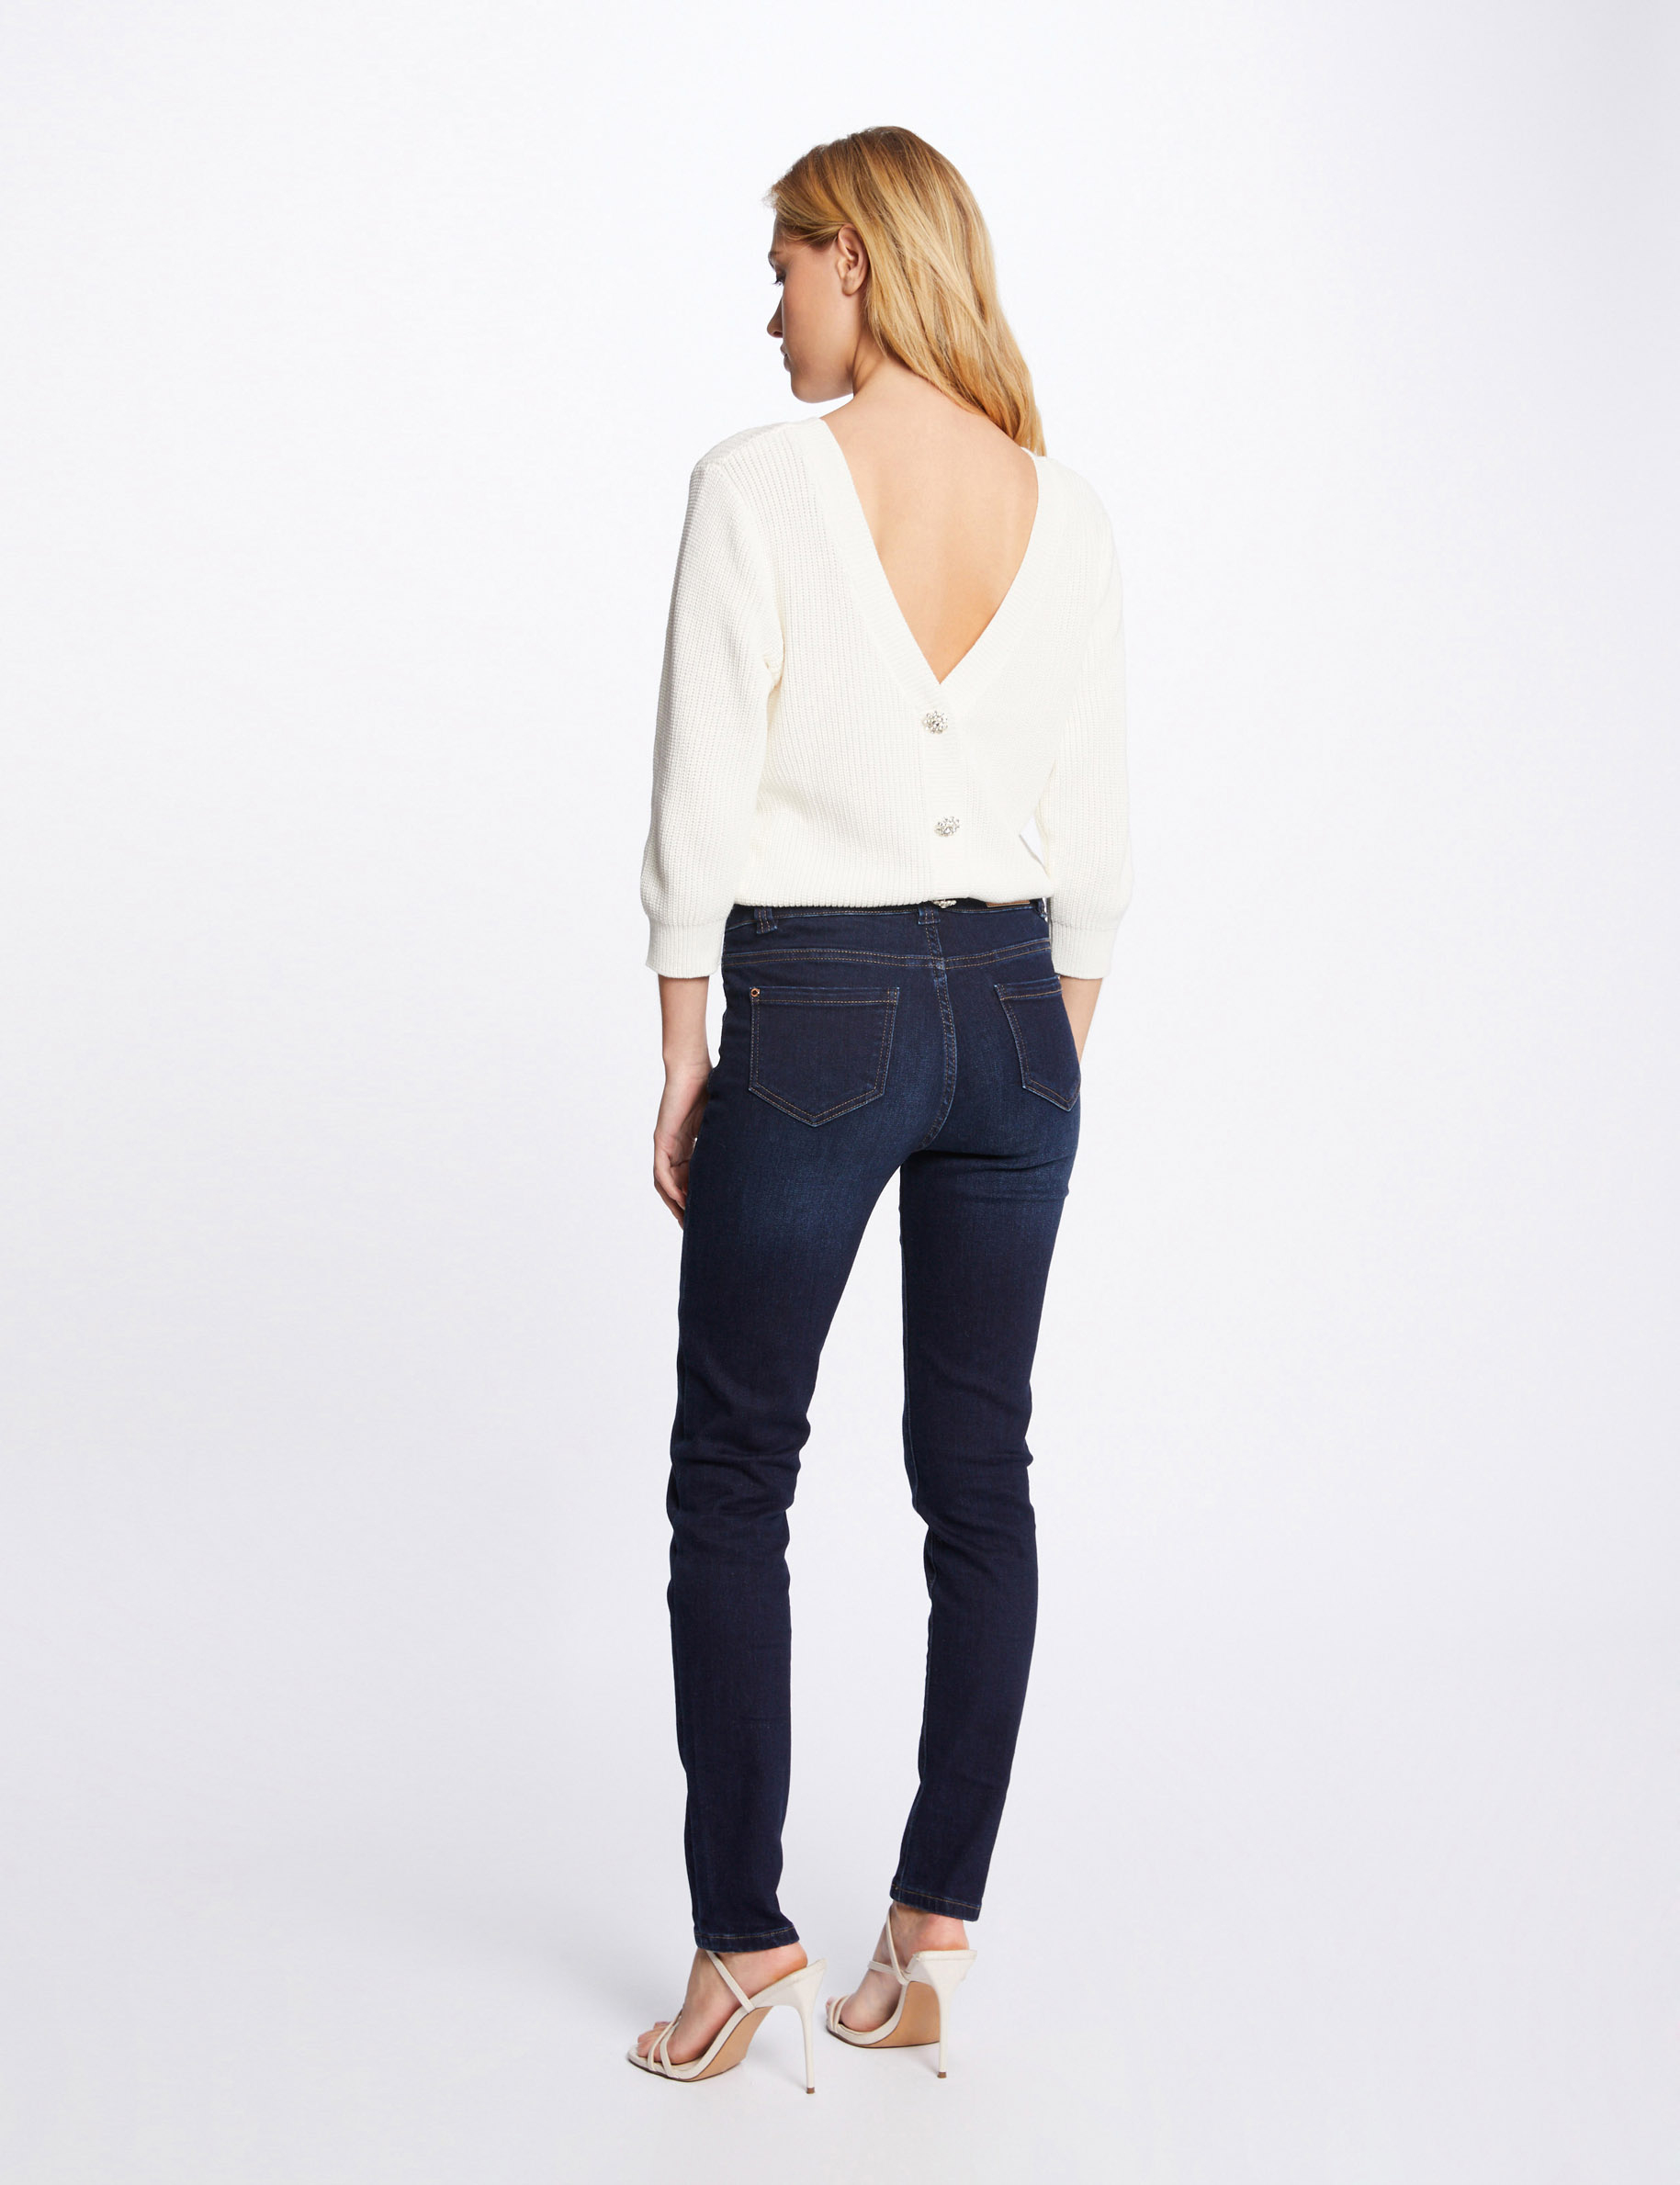 Jumper 3/4-length sleeves with open back ivory ladies'